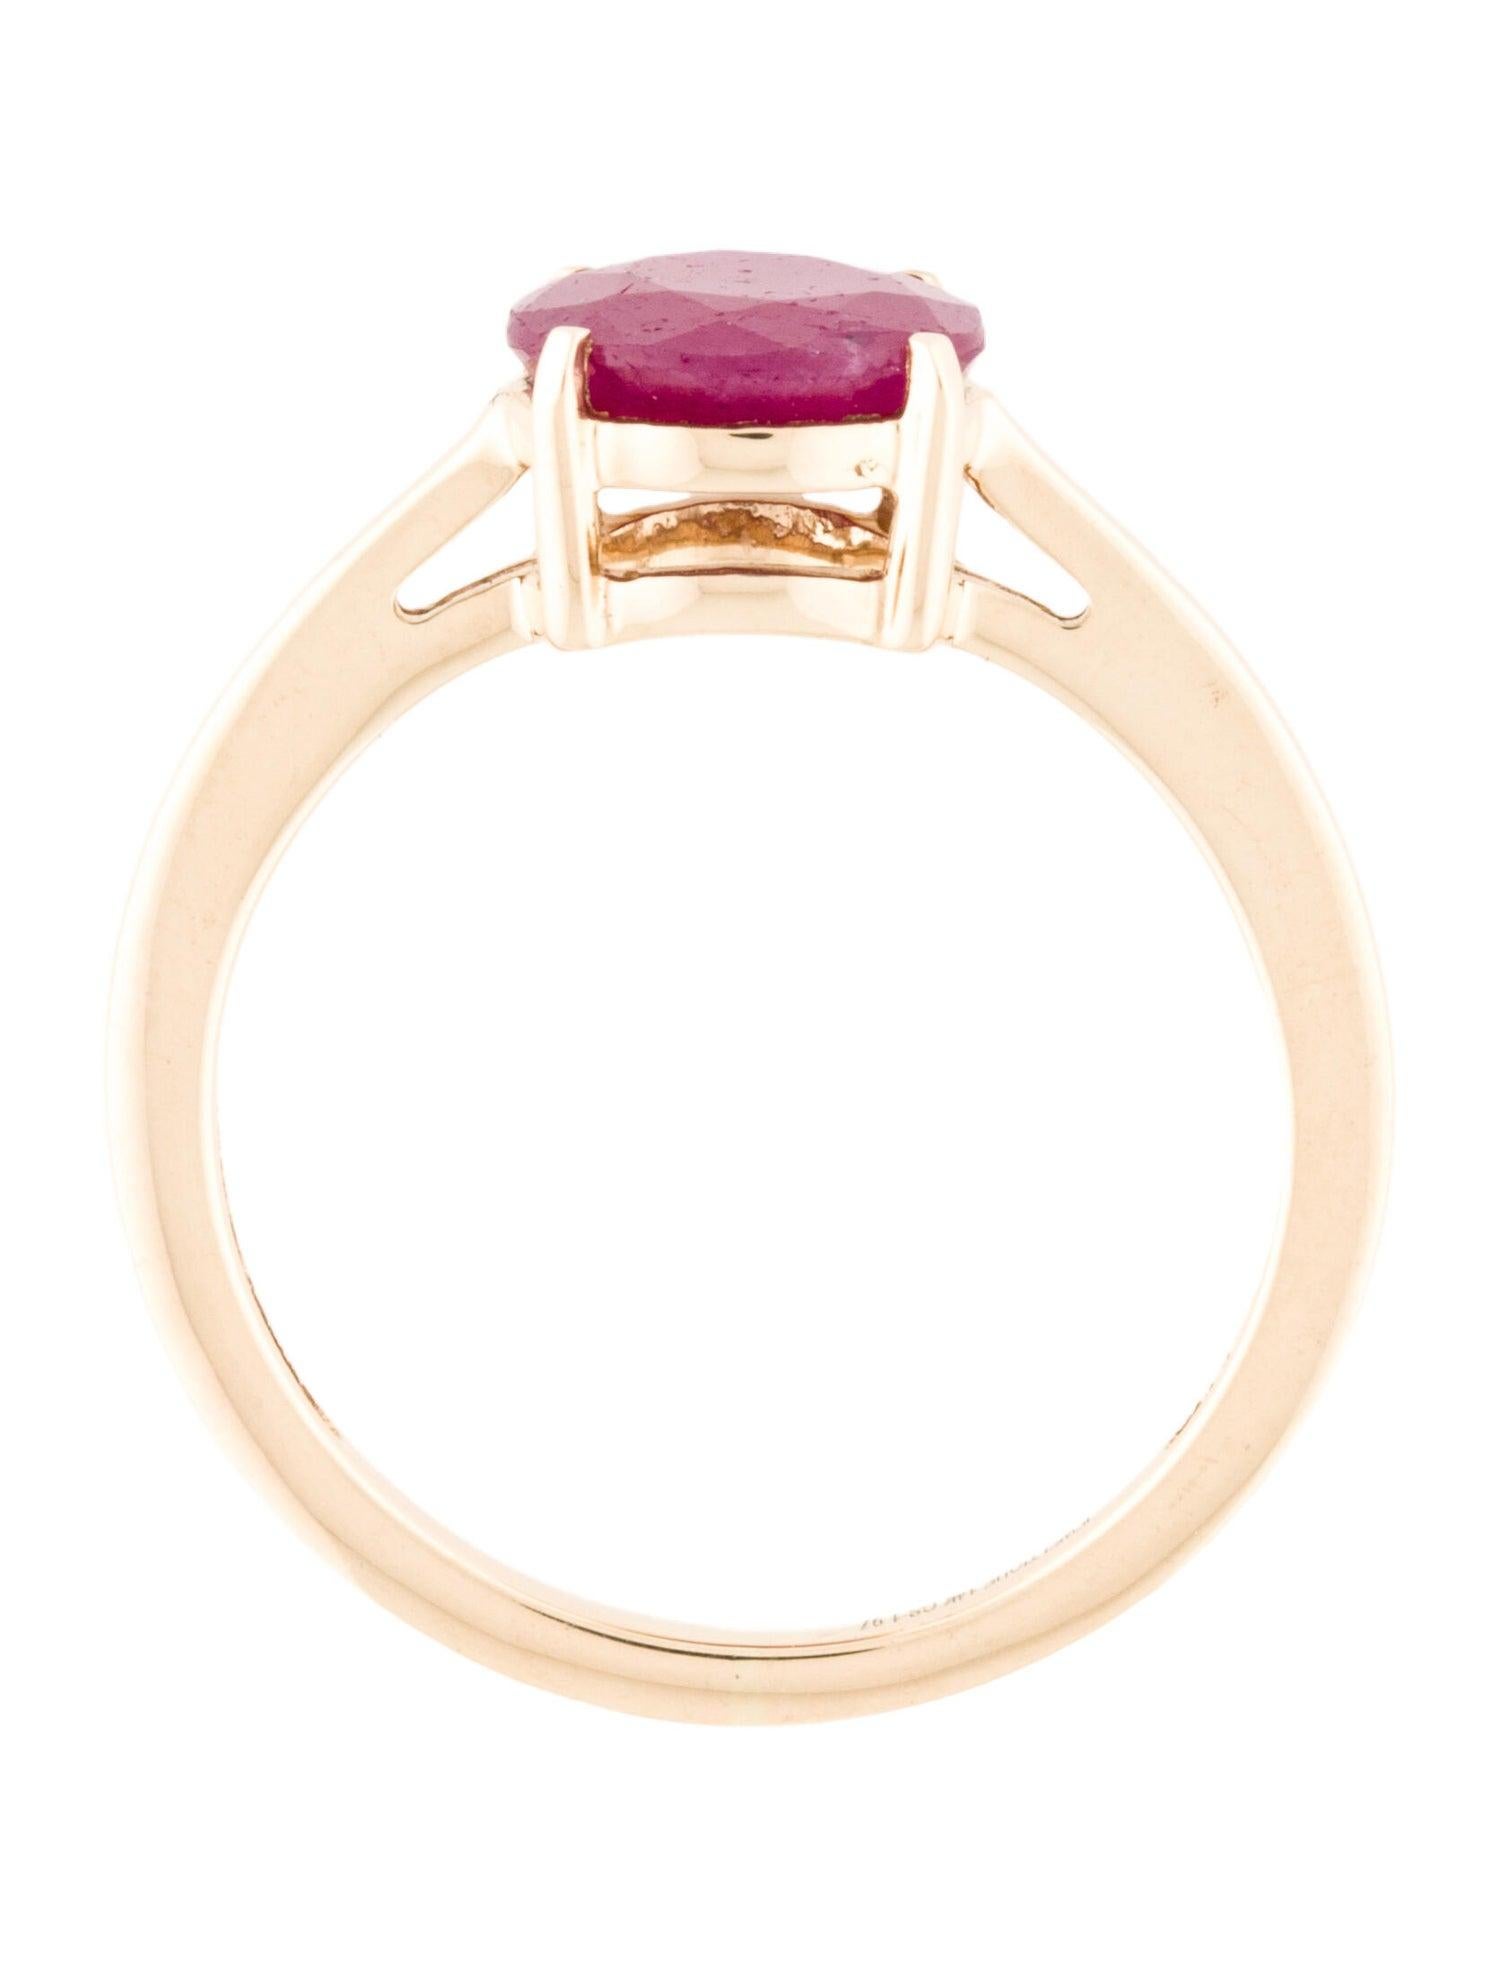 14K Ruby Cocktail Ring 1.56ct - Size 7 - Elegant Statement Jewelry - Luxury In New Condition For Sale In Holtsville, NY